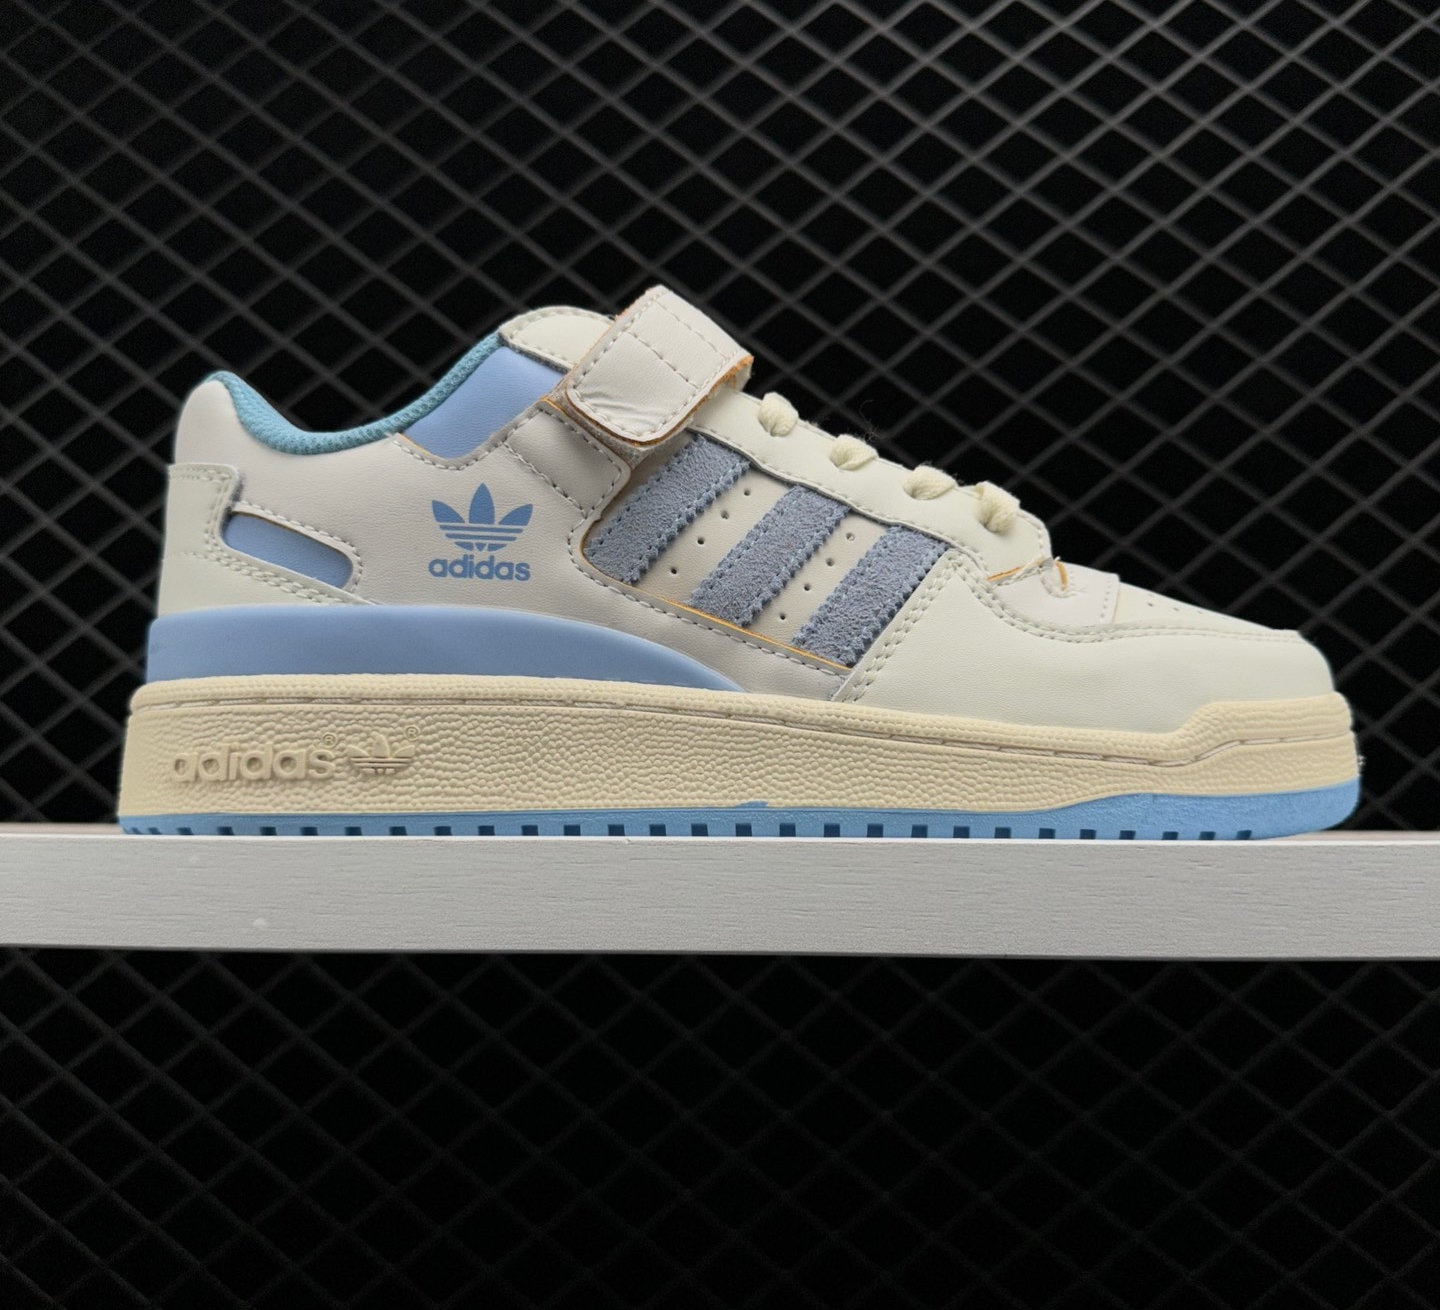 Adidas Forum 84 LG 'White Clear Sky' GZ1893 - Stylish and Classic Sneakers